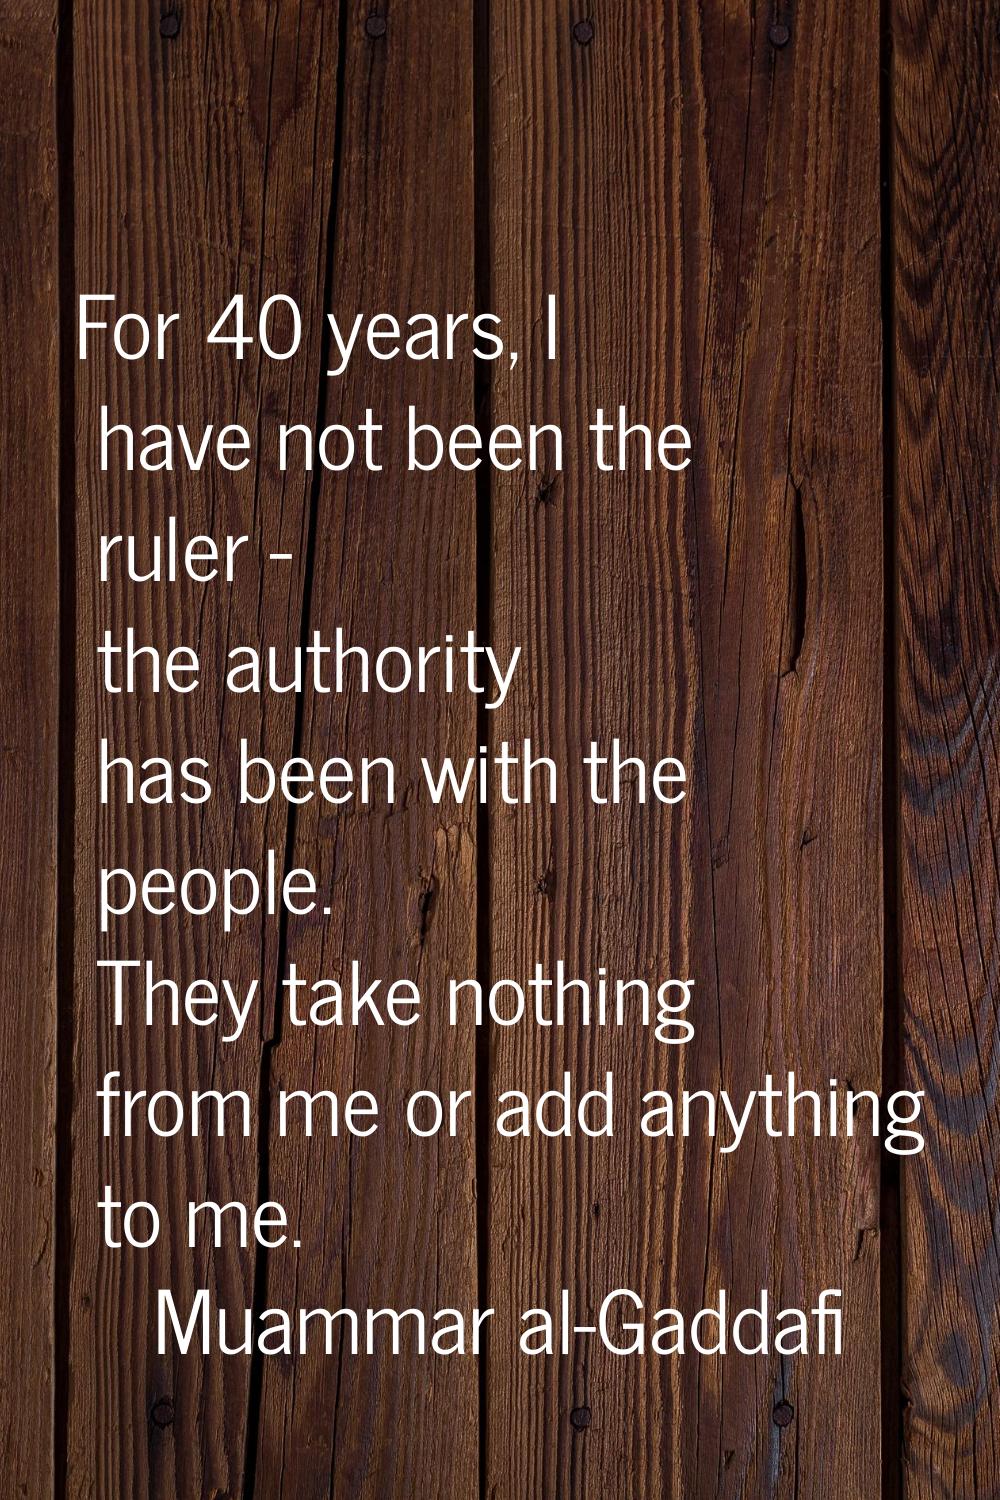 For 40 years, I have not been the ruler - the authority has been with the people. They take nothing